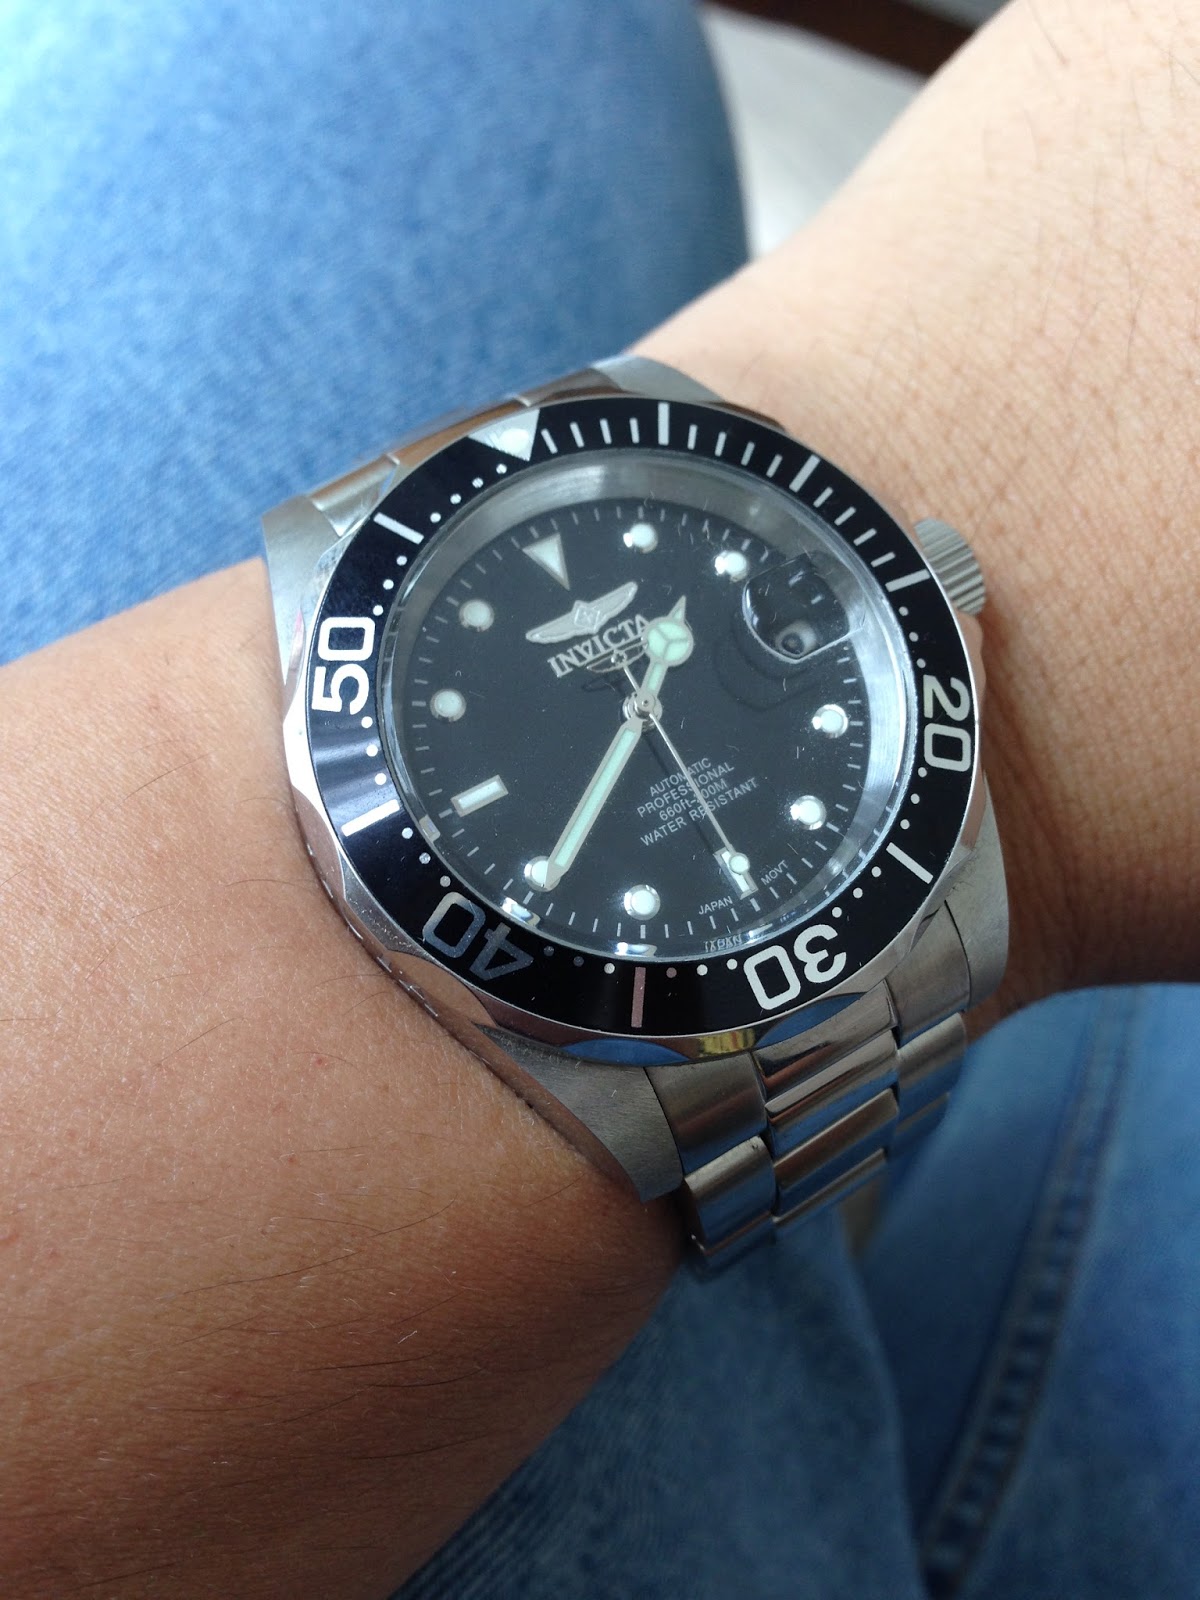 My Western Watch Invicta 8926 Pro Diver Automatic Watch - A Weird Hommage Wannabe, A Review